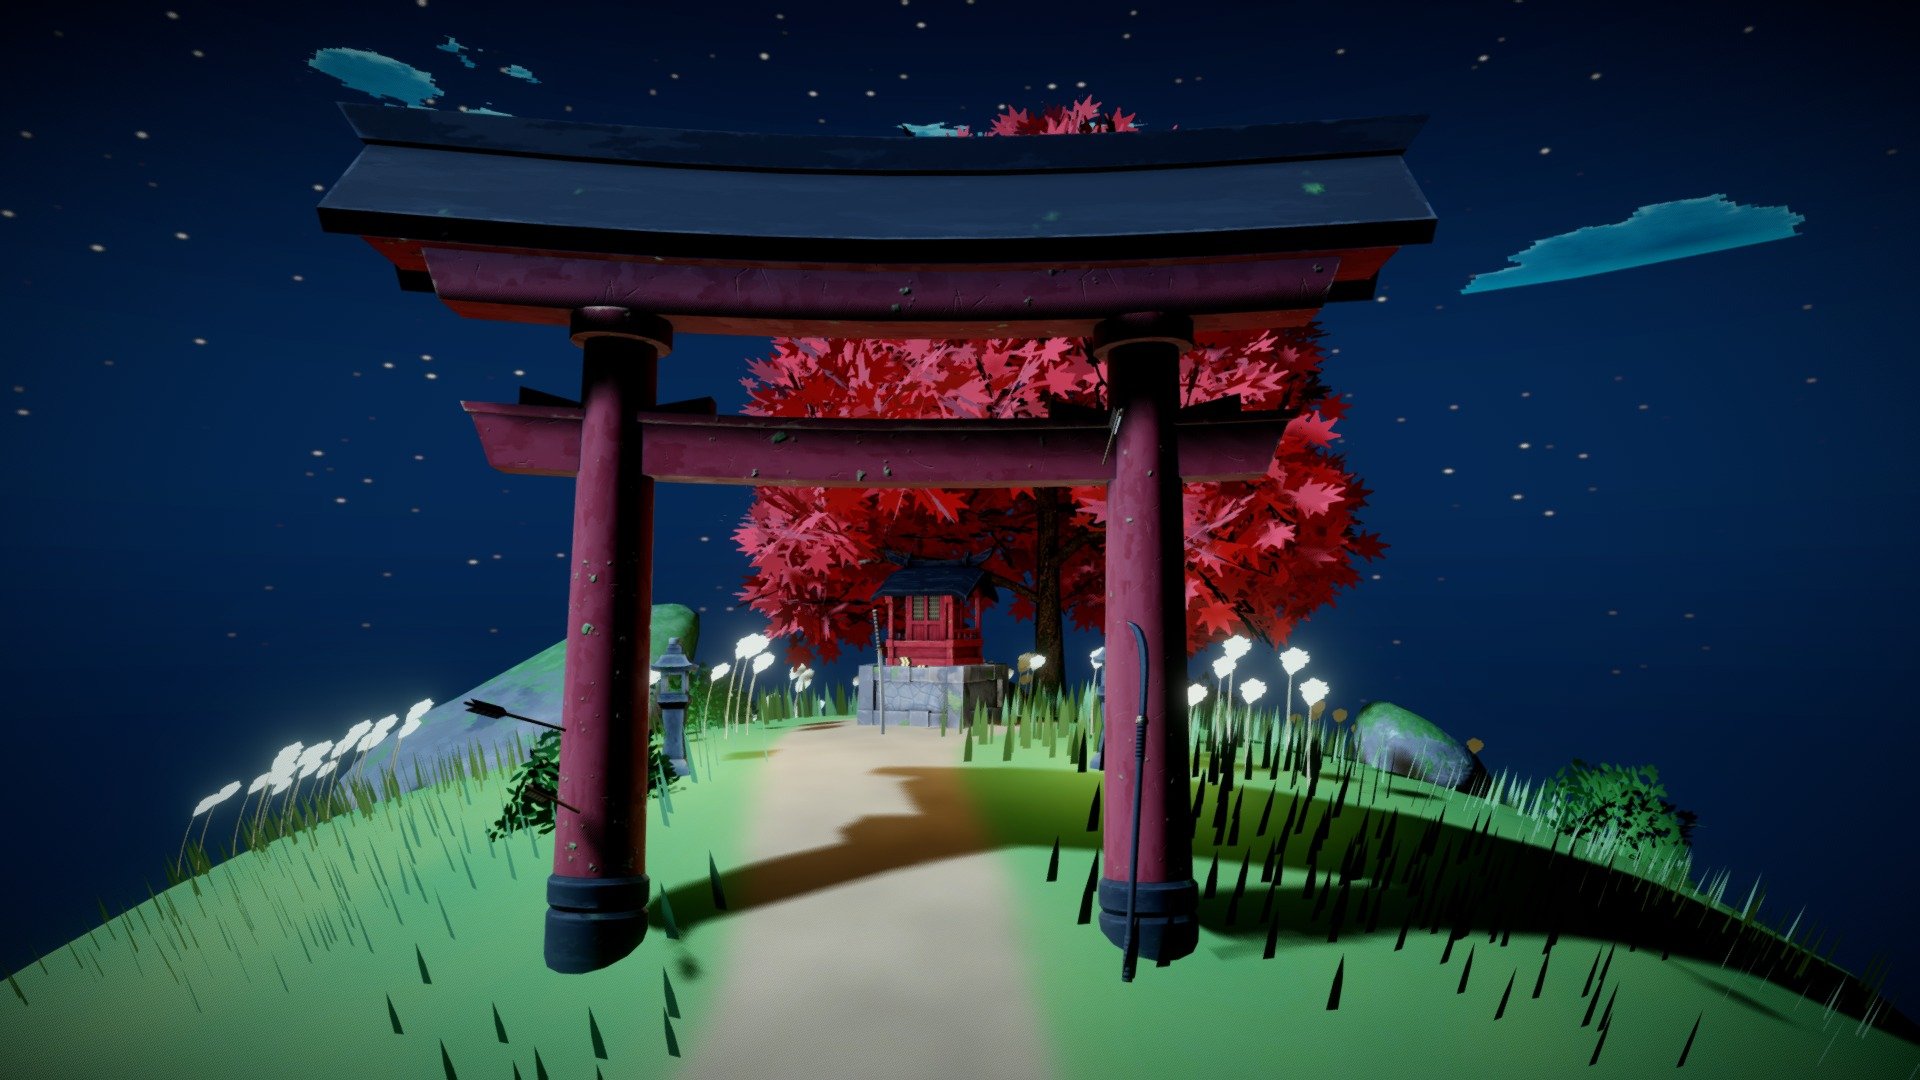 As i've recently made the switch from 3dsMax to Blender, i though it'd be nice to try and use Blender for a little project.
I was inspired by the recent update to Genshin impact in which we get to explore a Japanese-inspired country.

The Textures were made using Substance Painter, which I've also never used before this little project 3d model